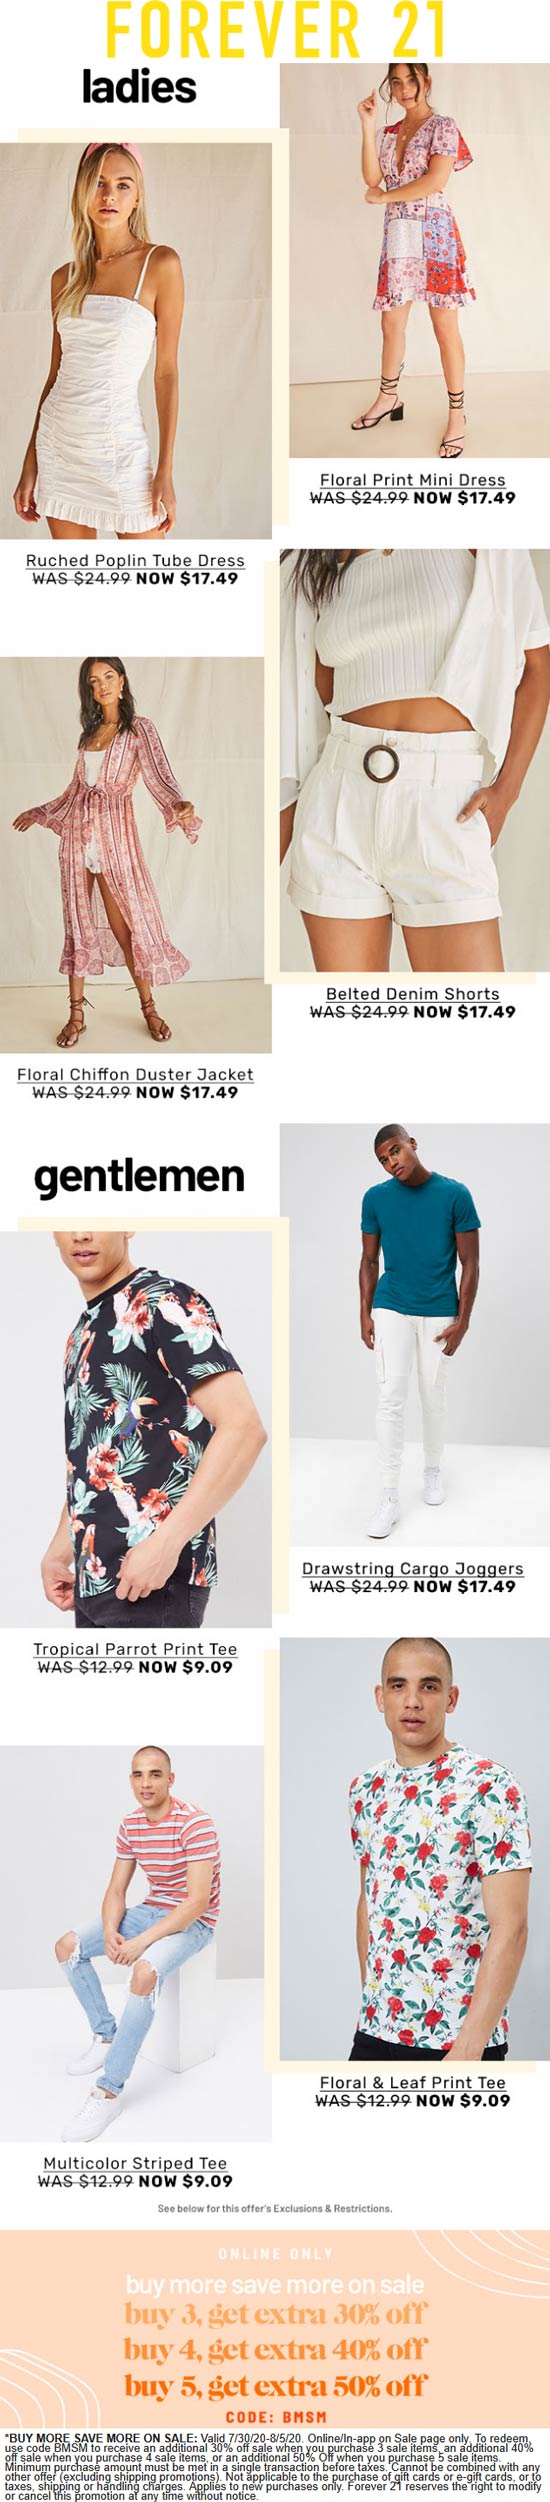 Forever 21 stores Coupon  30-50% off 3+ items at Forever 21 via promo code BMSM #forever21 